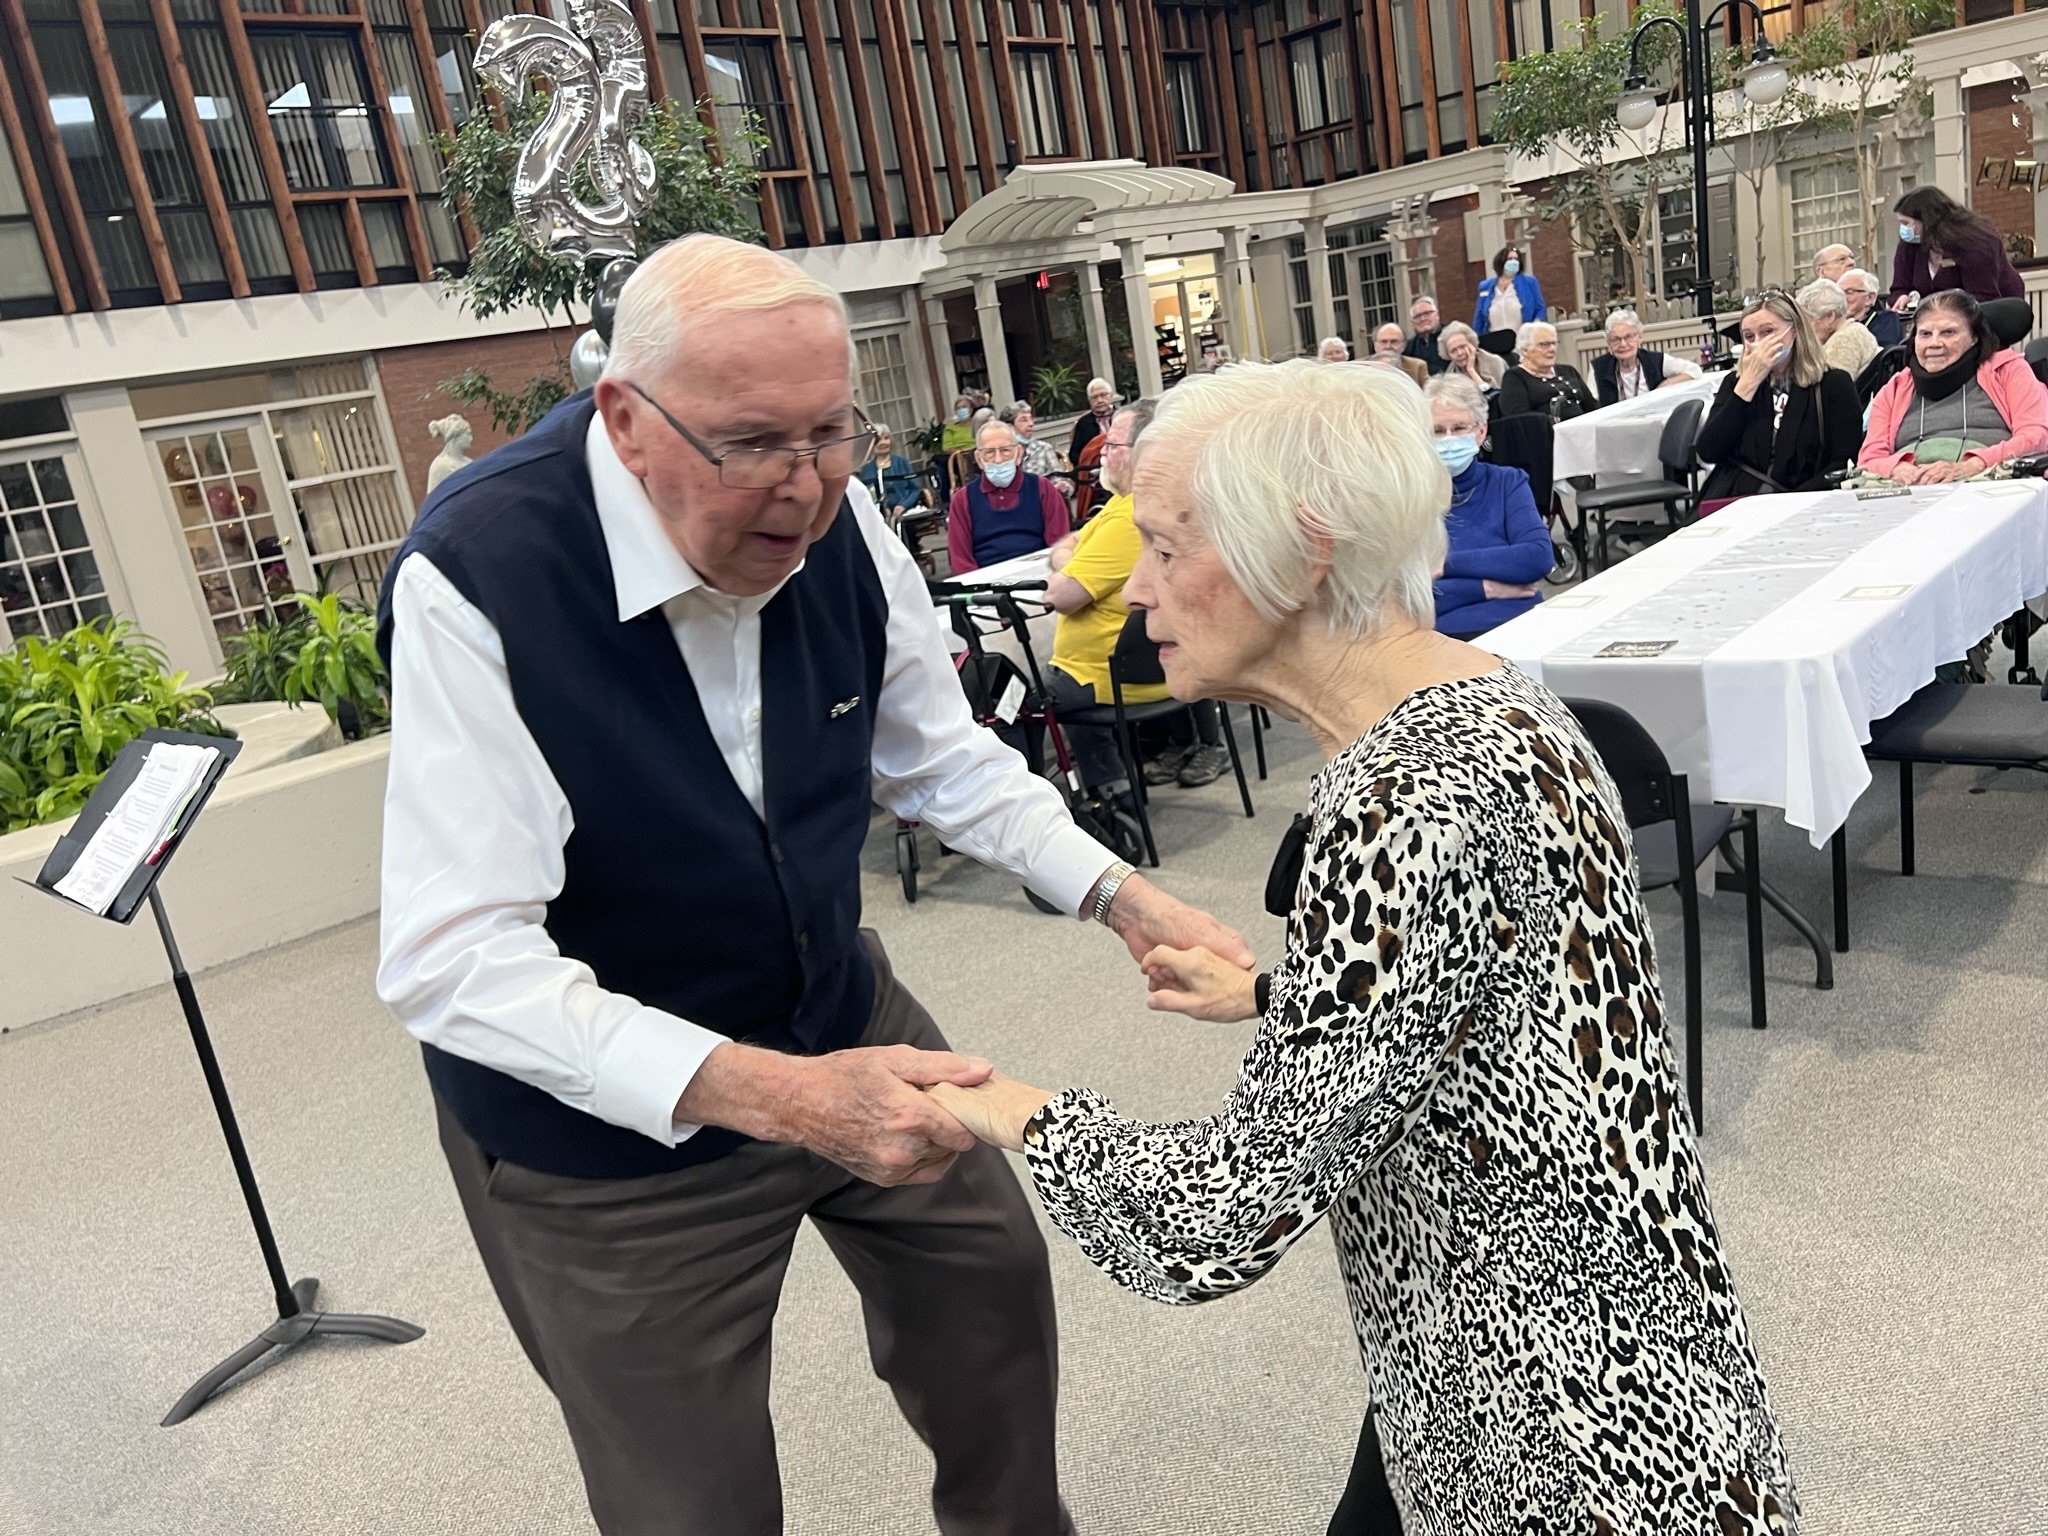 David Reed, 94 (left) and Marilyn Hartley, 83 (right) are first to hit the dance floor when the jazz band got jamming. All photos by David Tuan Bui.